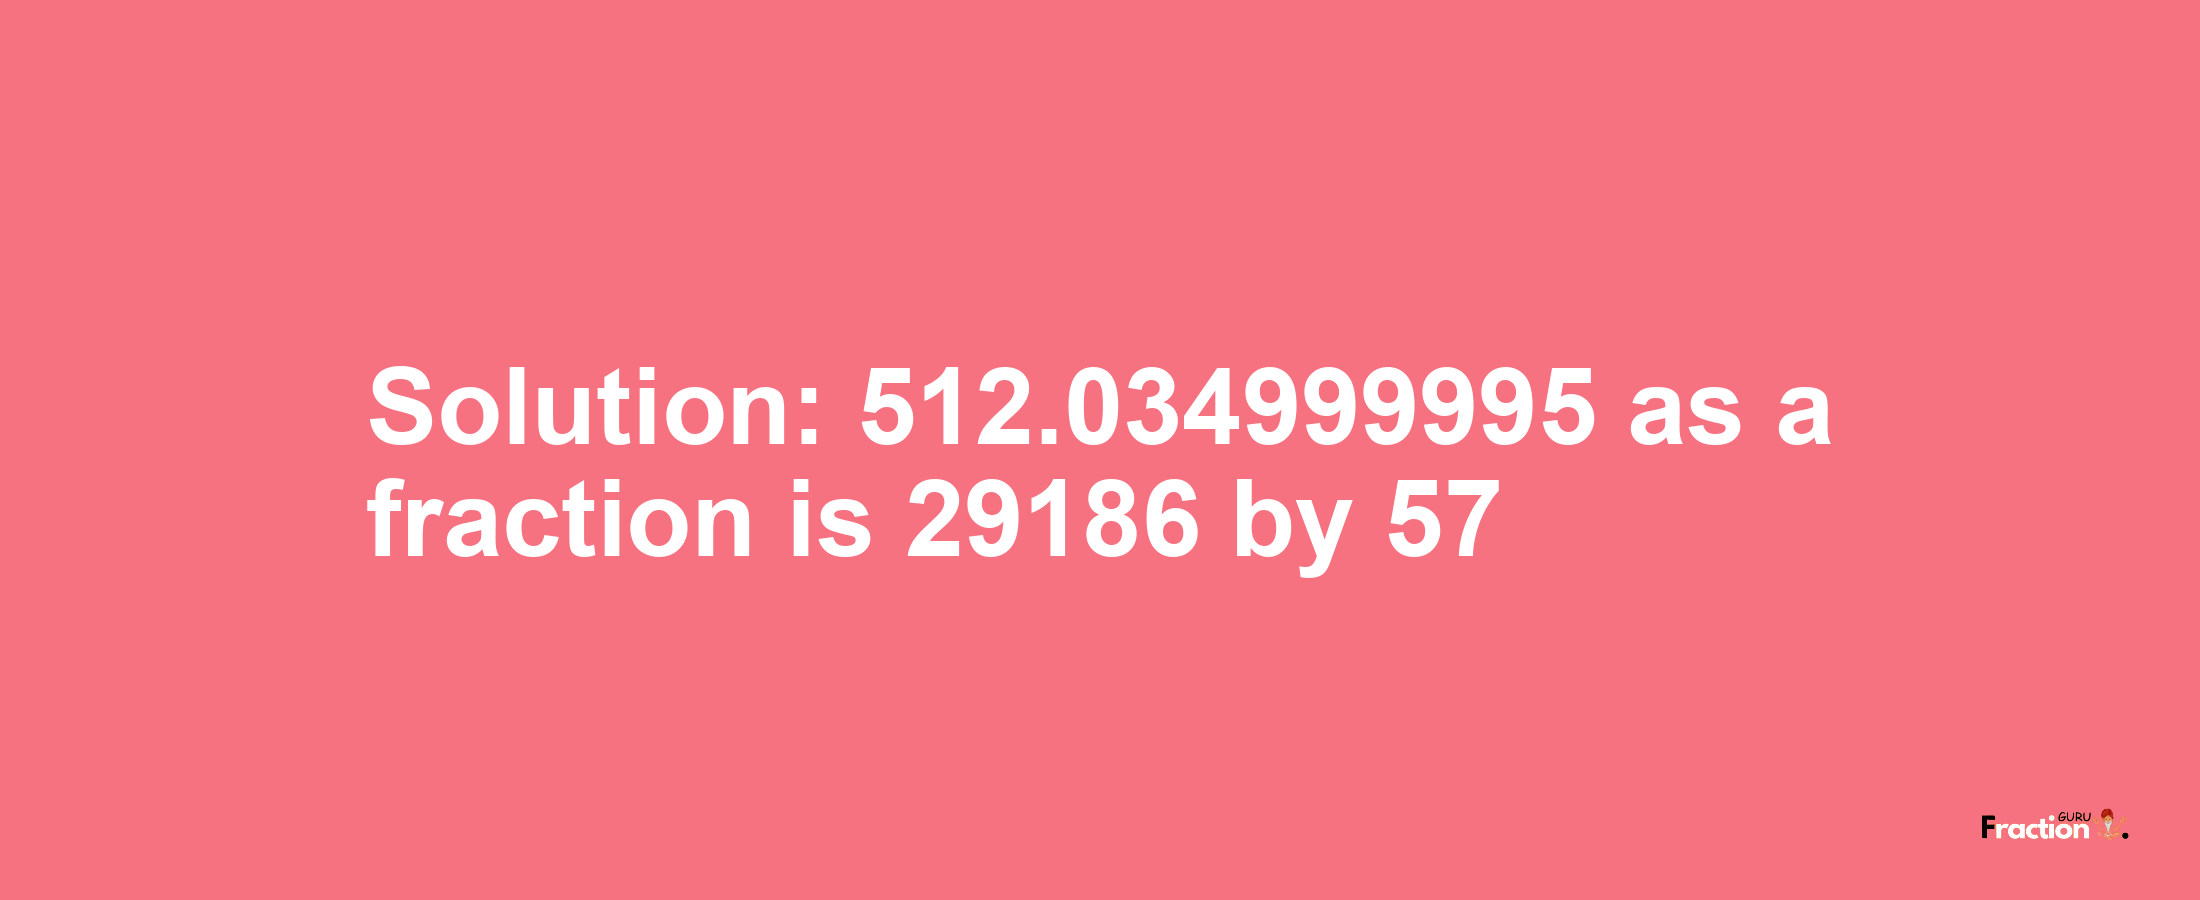 Solution:512.034999995 as a fraction is 29186/57